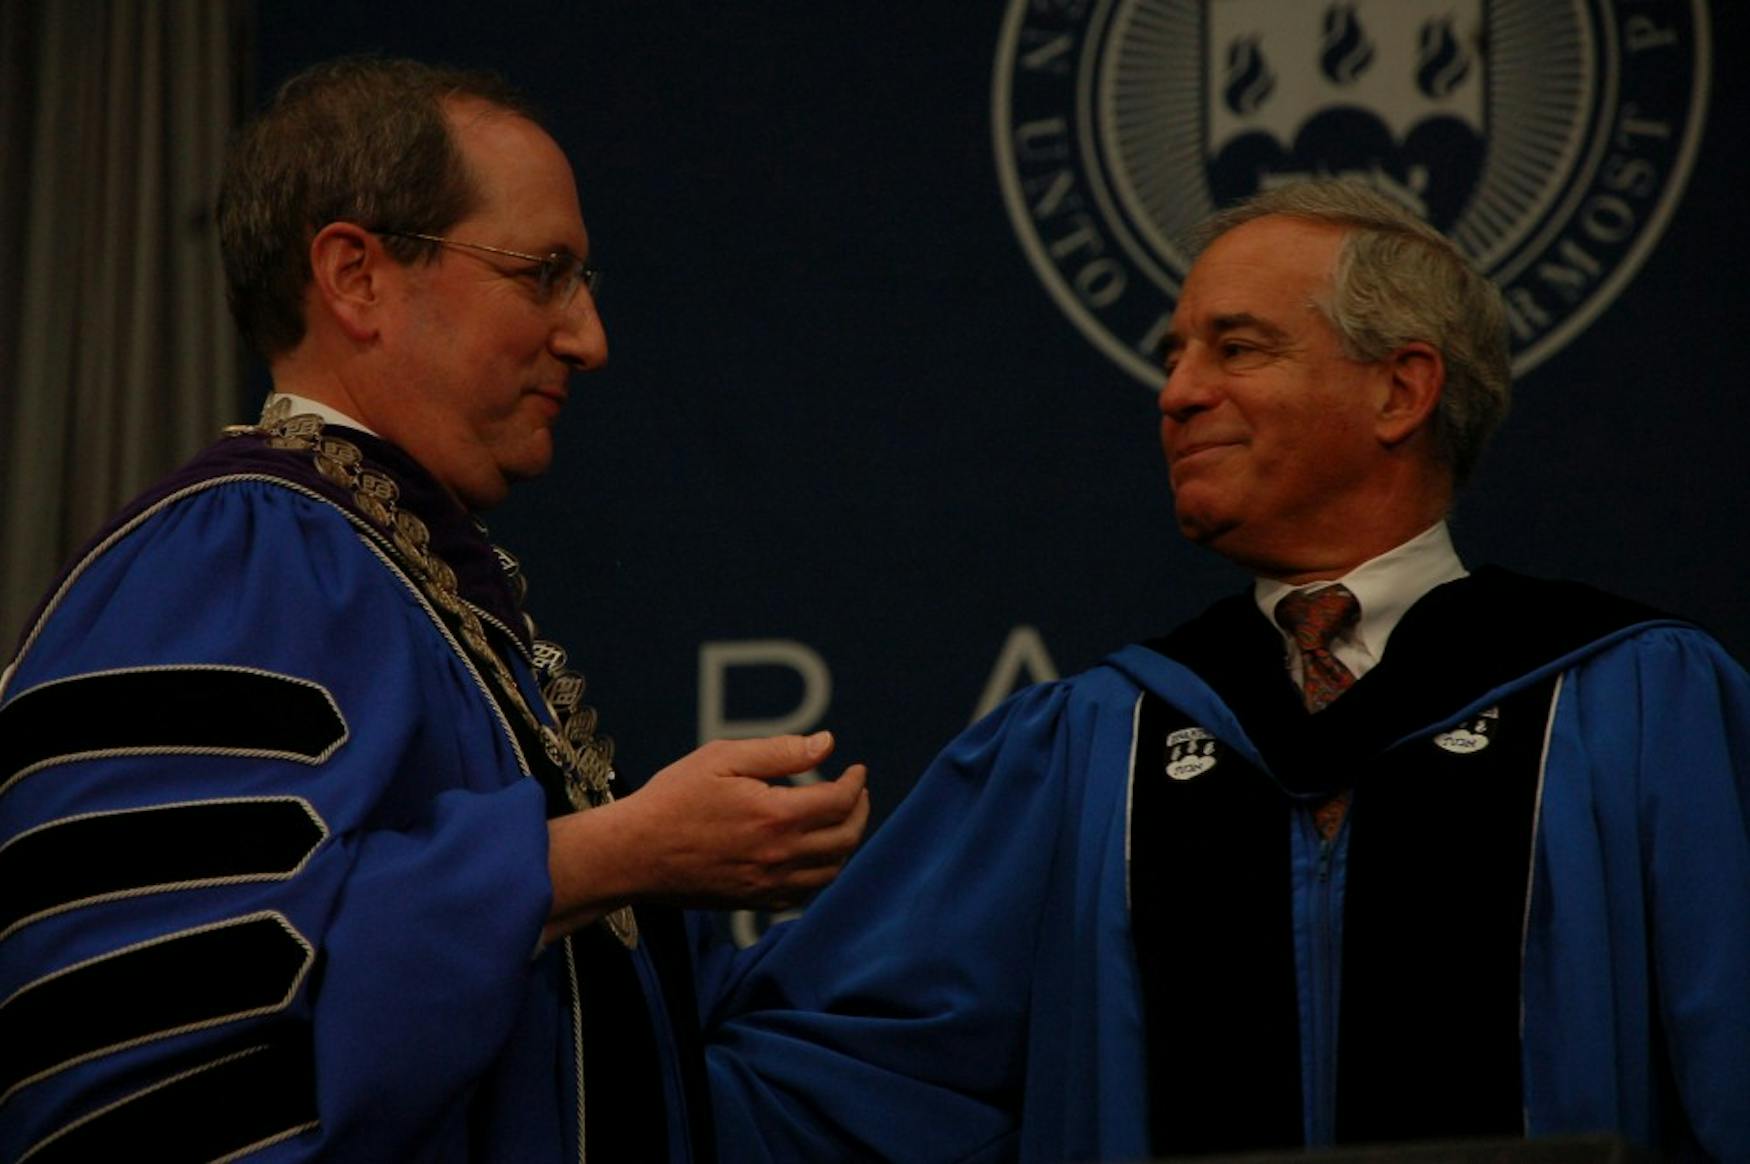 INITIATION: Former University President Jehuda Reinharz (right) welcomes the University's eighth President Frederick Lawrence.